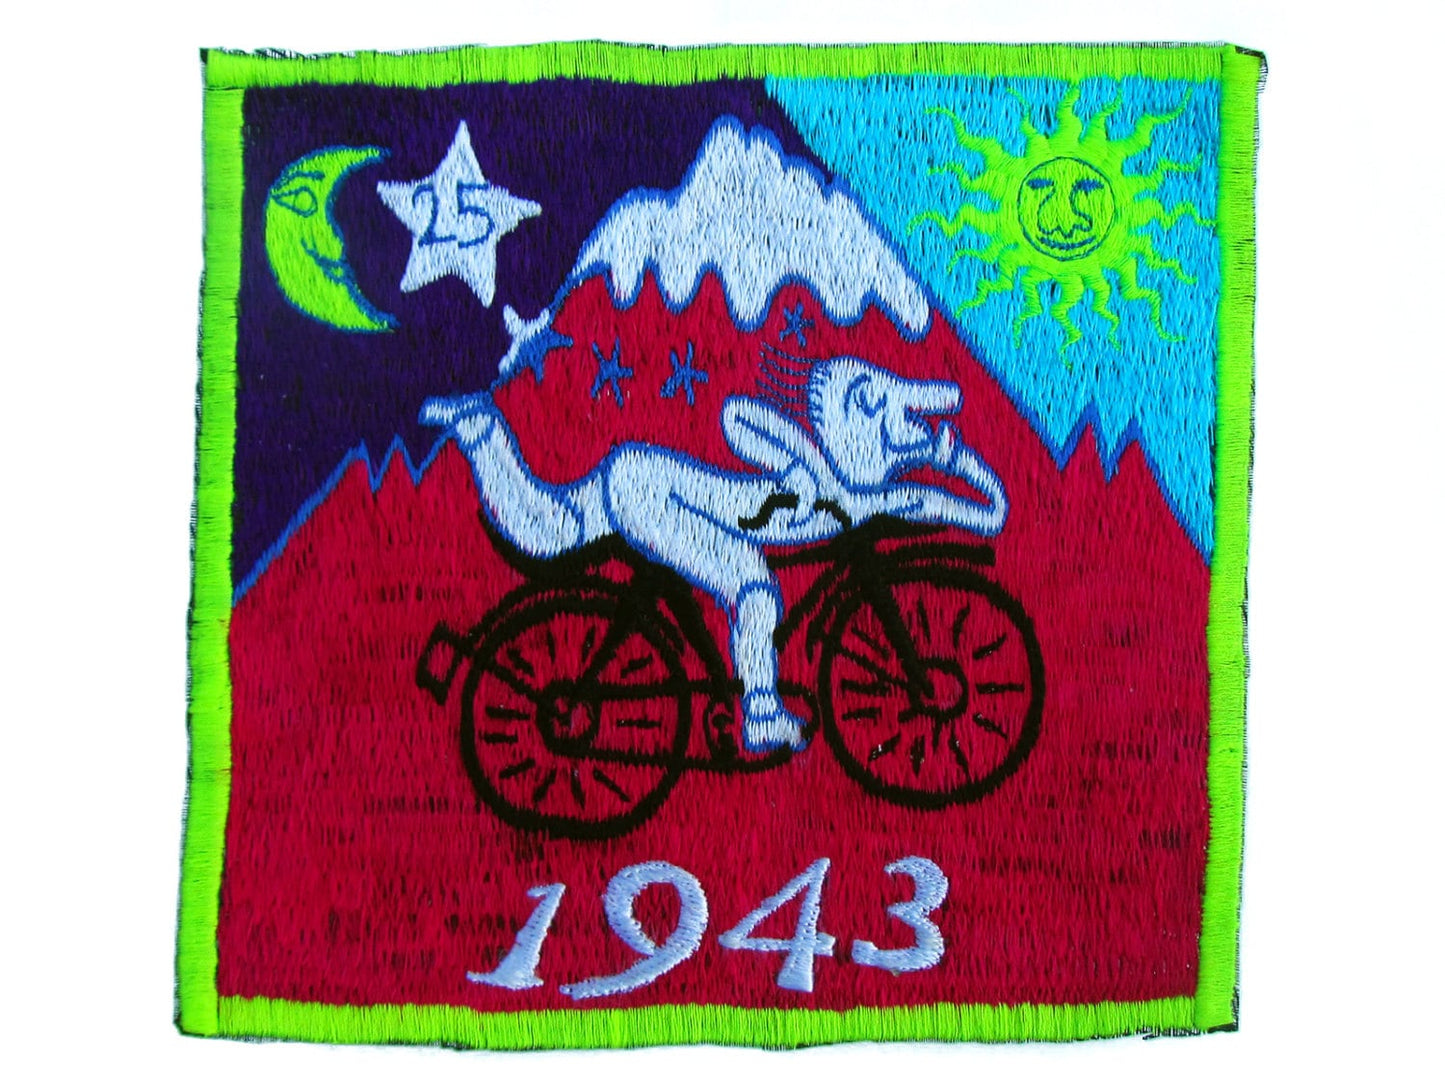 Pink Bicycle Day Albert Hofmann 1943 LSD Patch Psychedelic Trip Hippie Drug Timothy Leary Psychotherapy Divine Healing Medicine